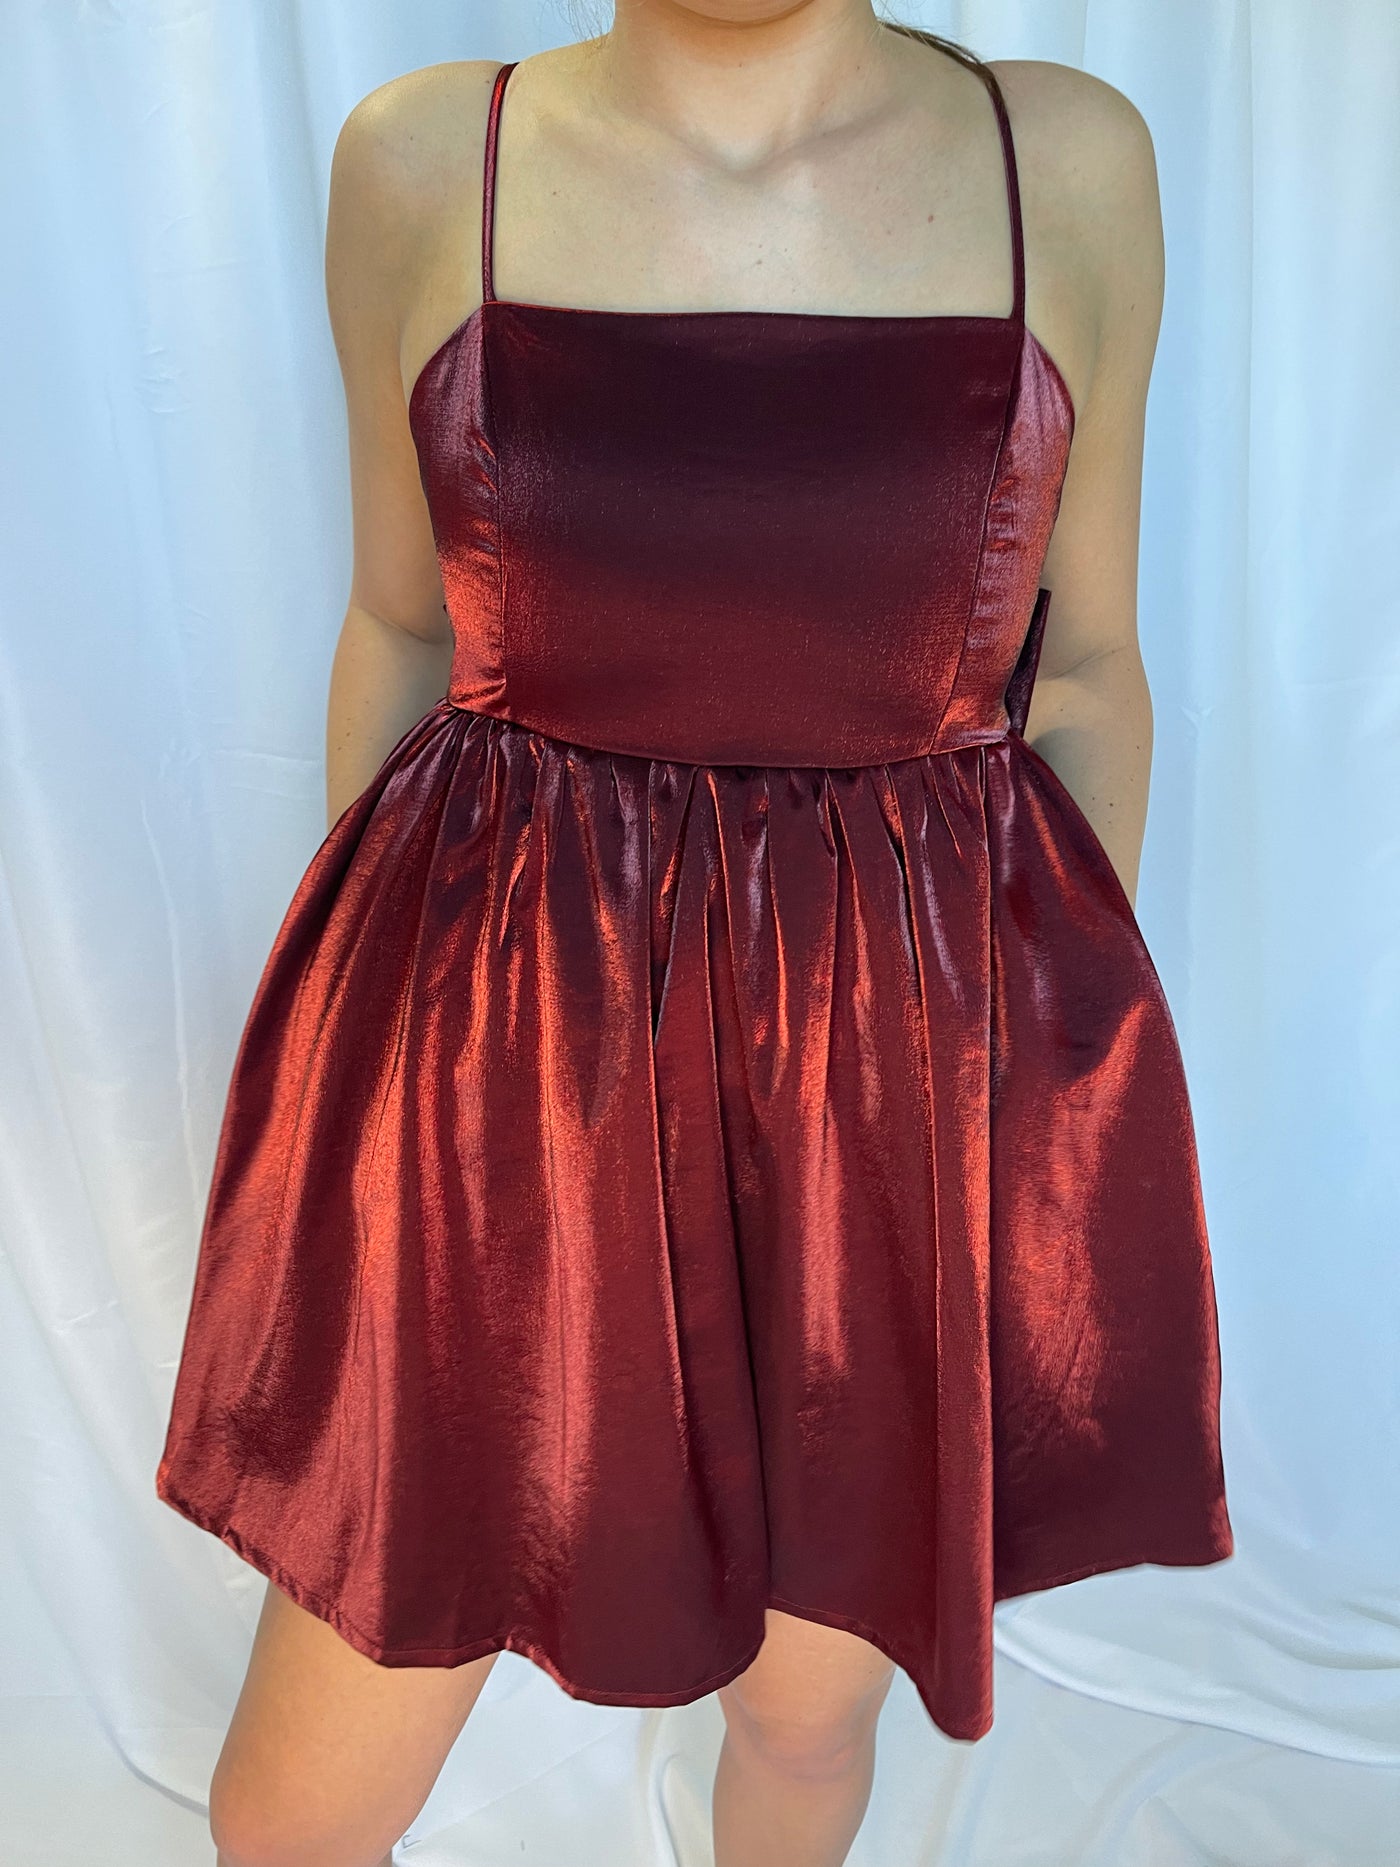 The Baby Doll Bow Dress from Shop Silvs is a burgundy baby doll dress.